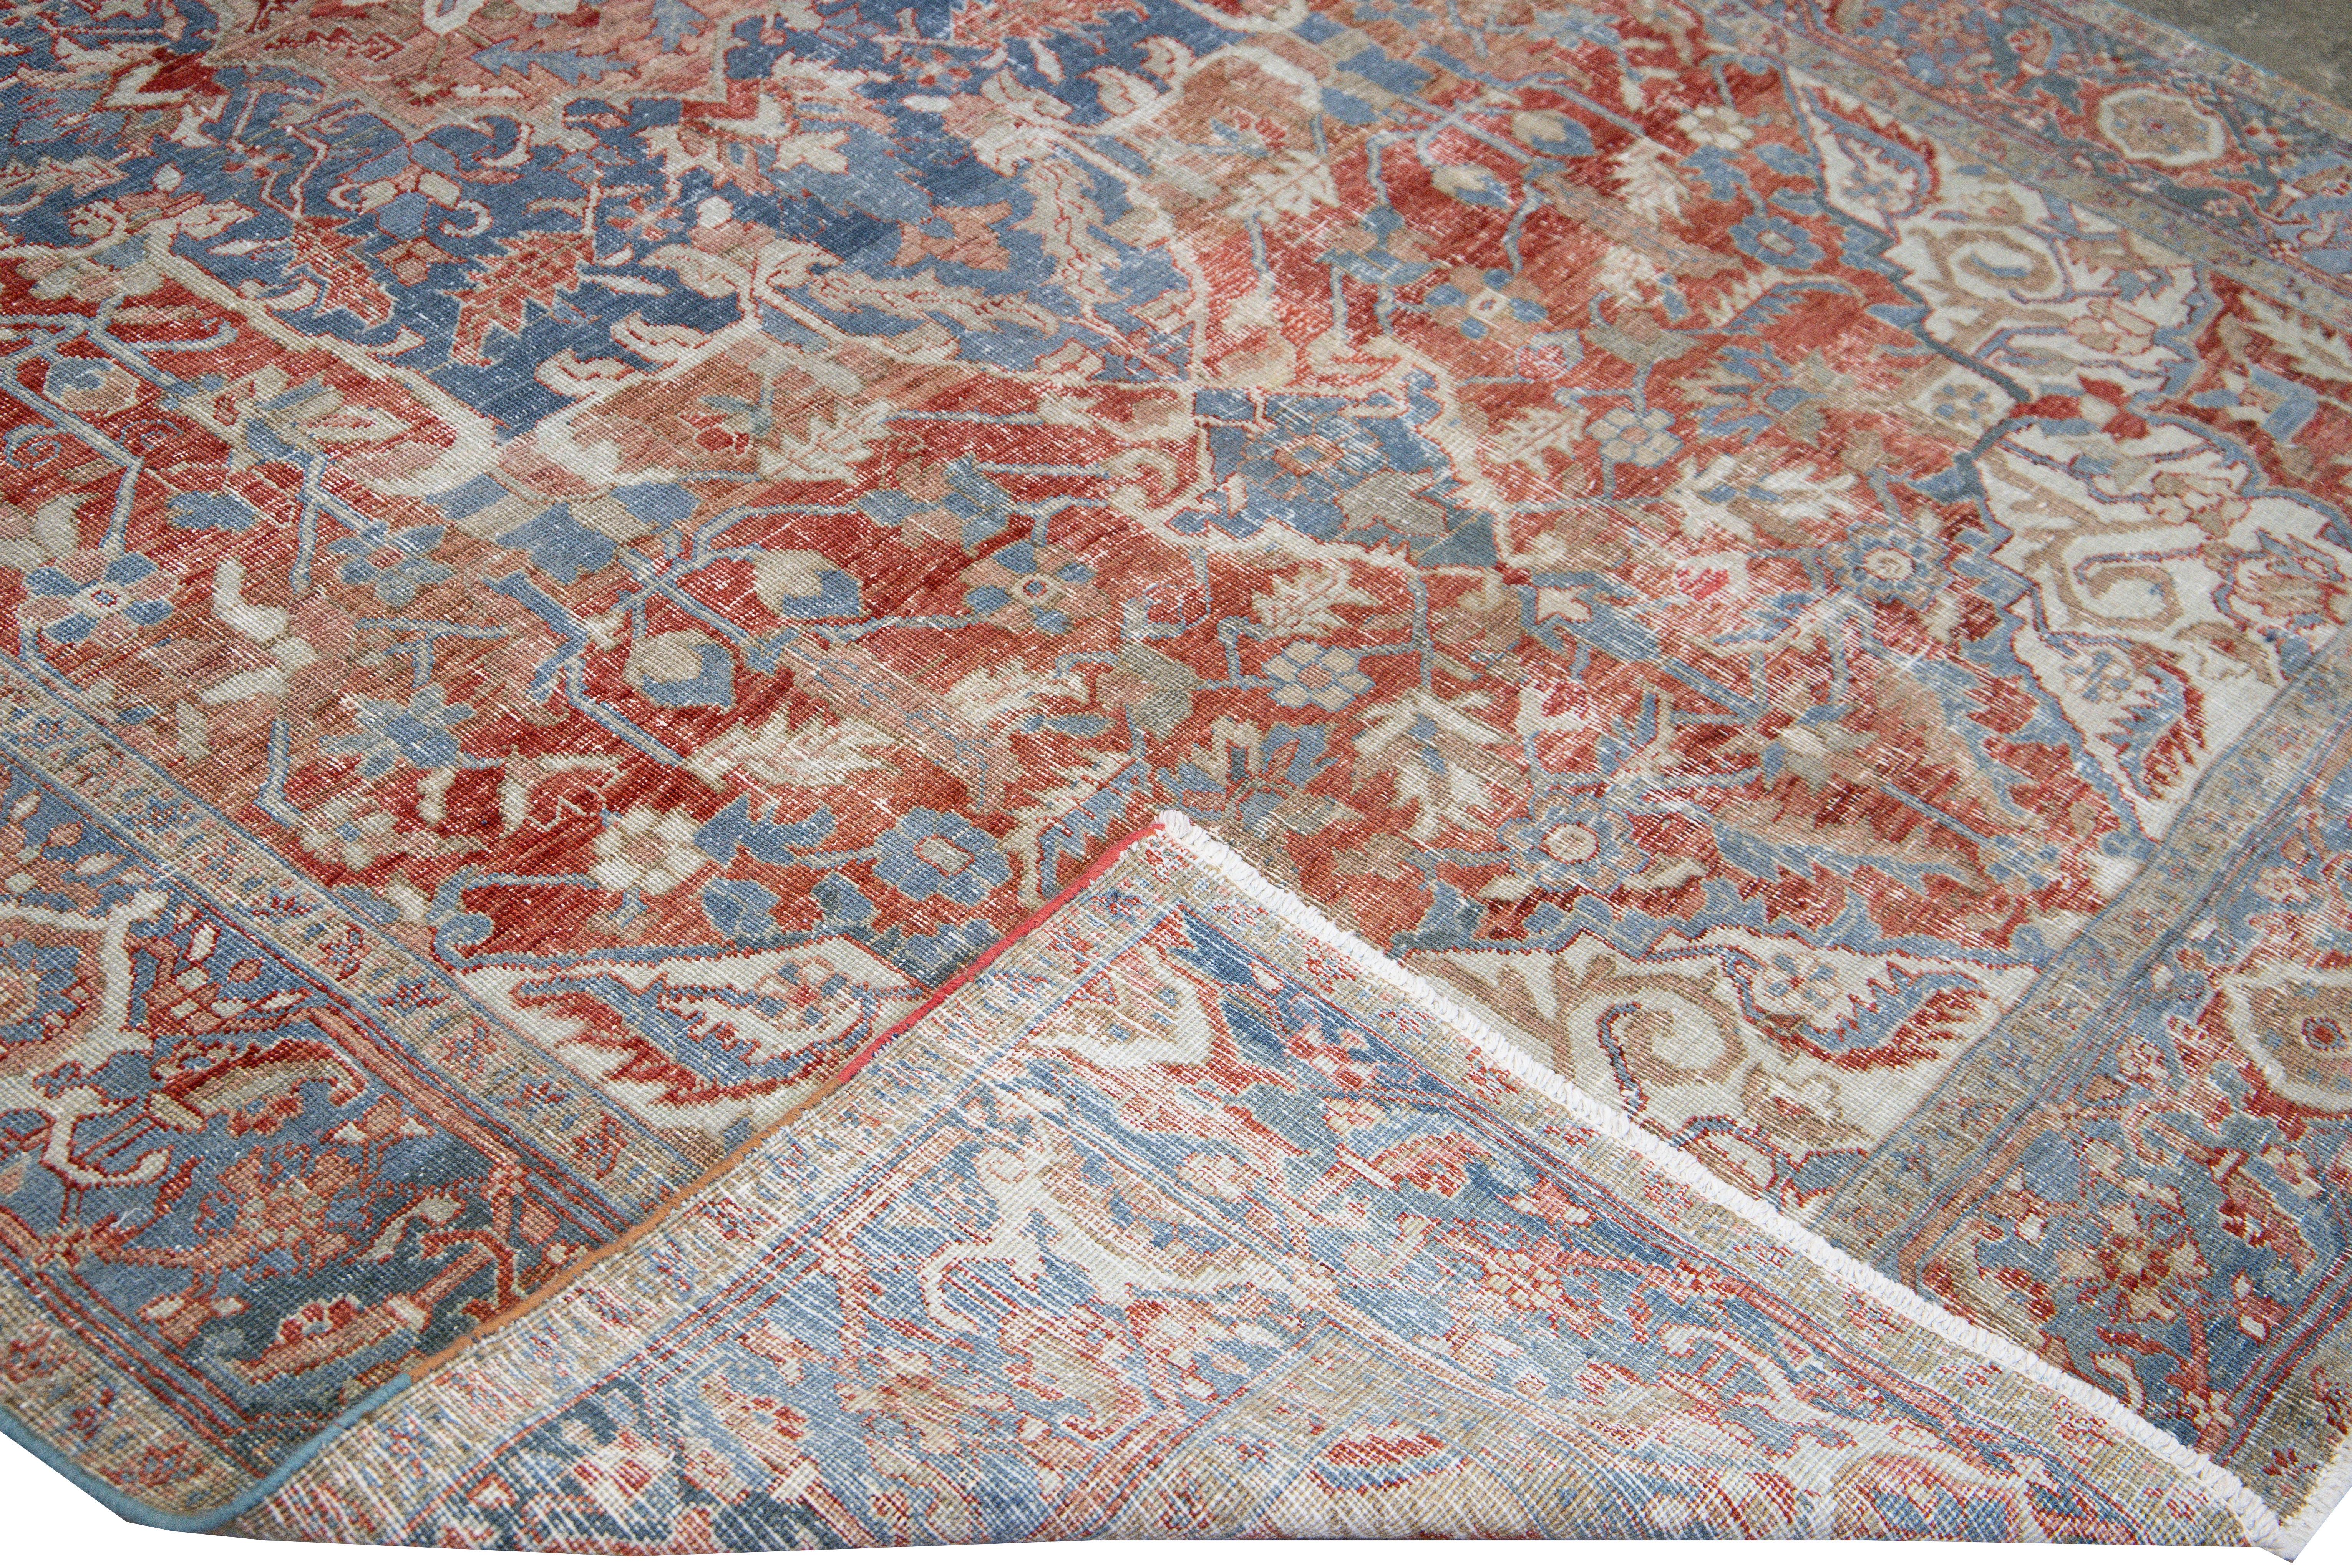 Beautiful antique Persian Heriz hand-knotted wool rug with a red field. This Serapi rug has a navy-blue frame and ivory accents in an all-over gorgeous shabby chic design.

This rug measures: 7'3